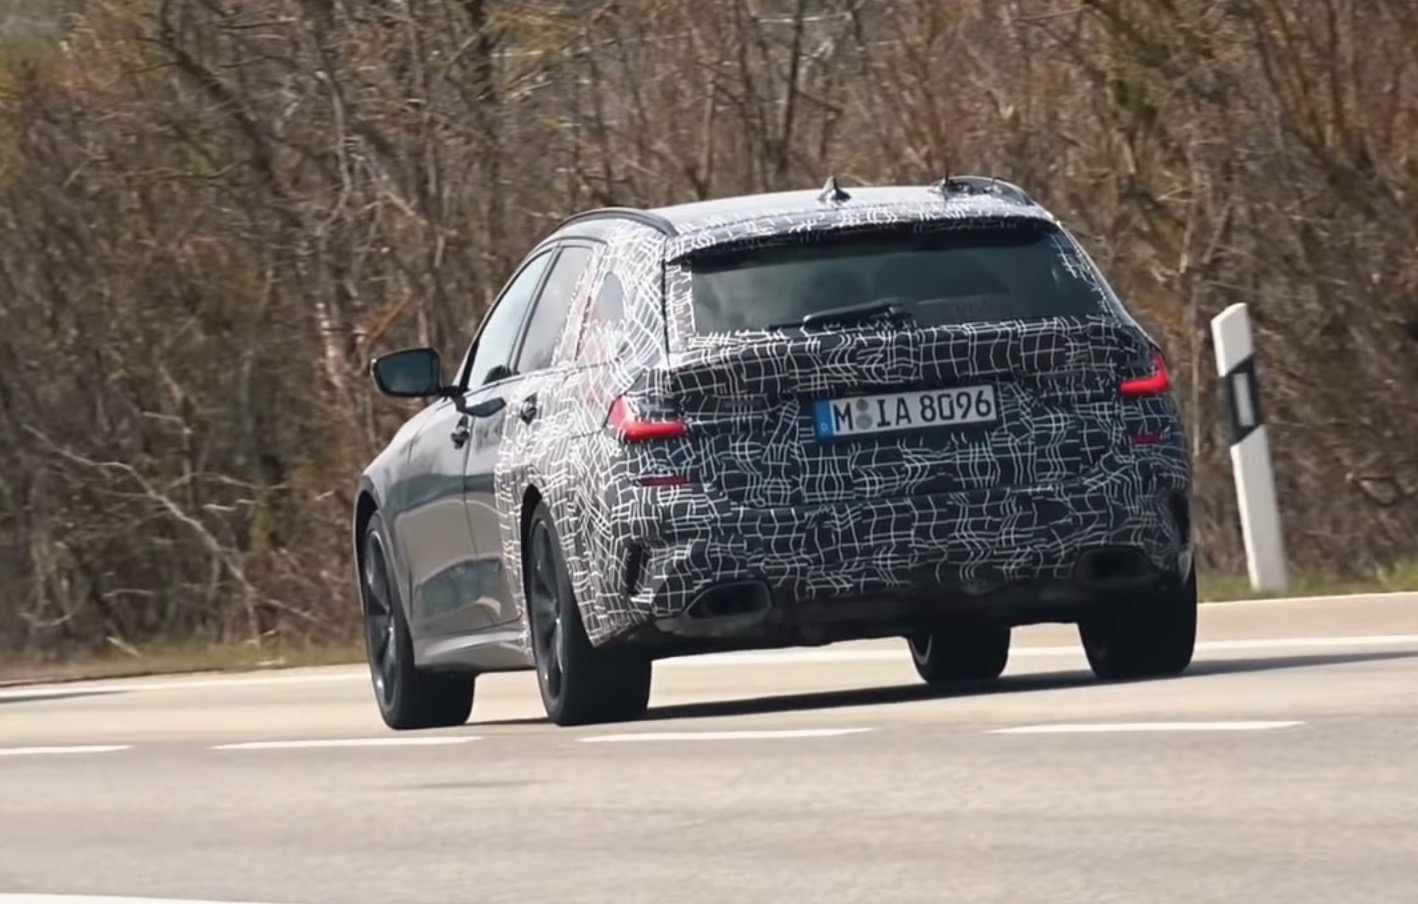 2020 BMW M340i Touring wagon spotted, sounds sick (video)